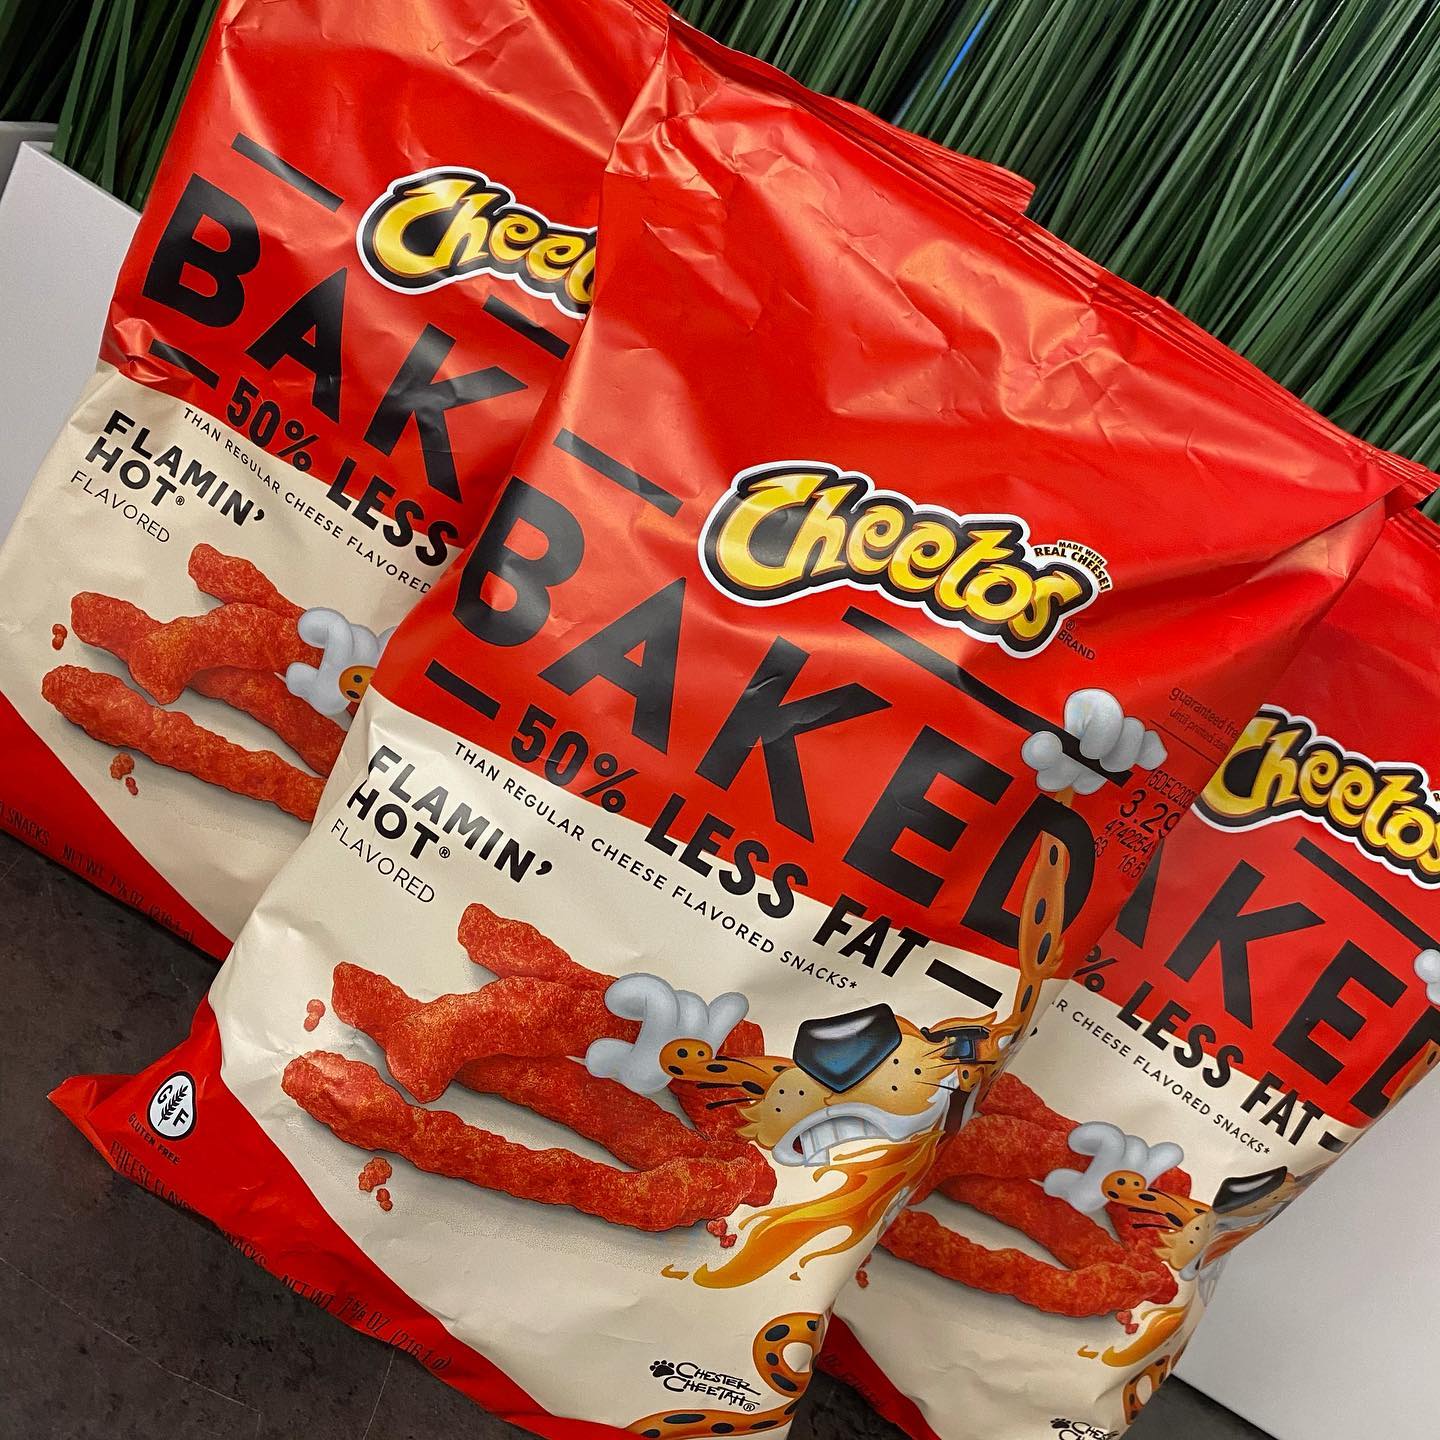 11 Baked Cheetos Nutrition Facts